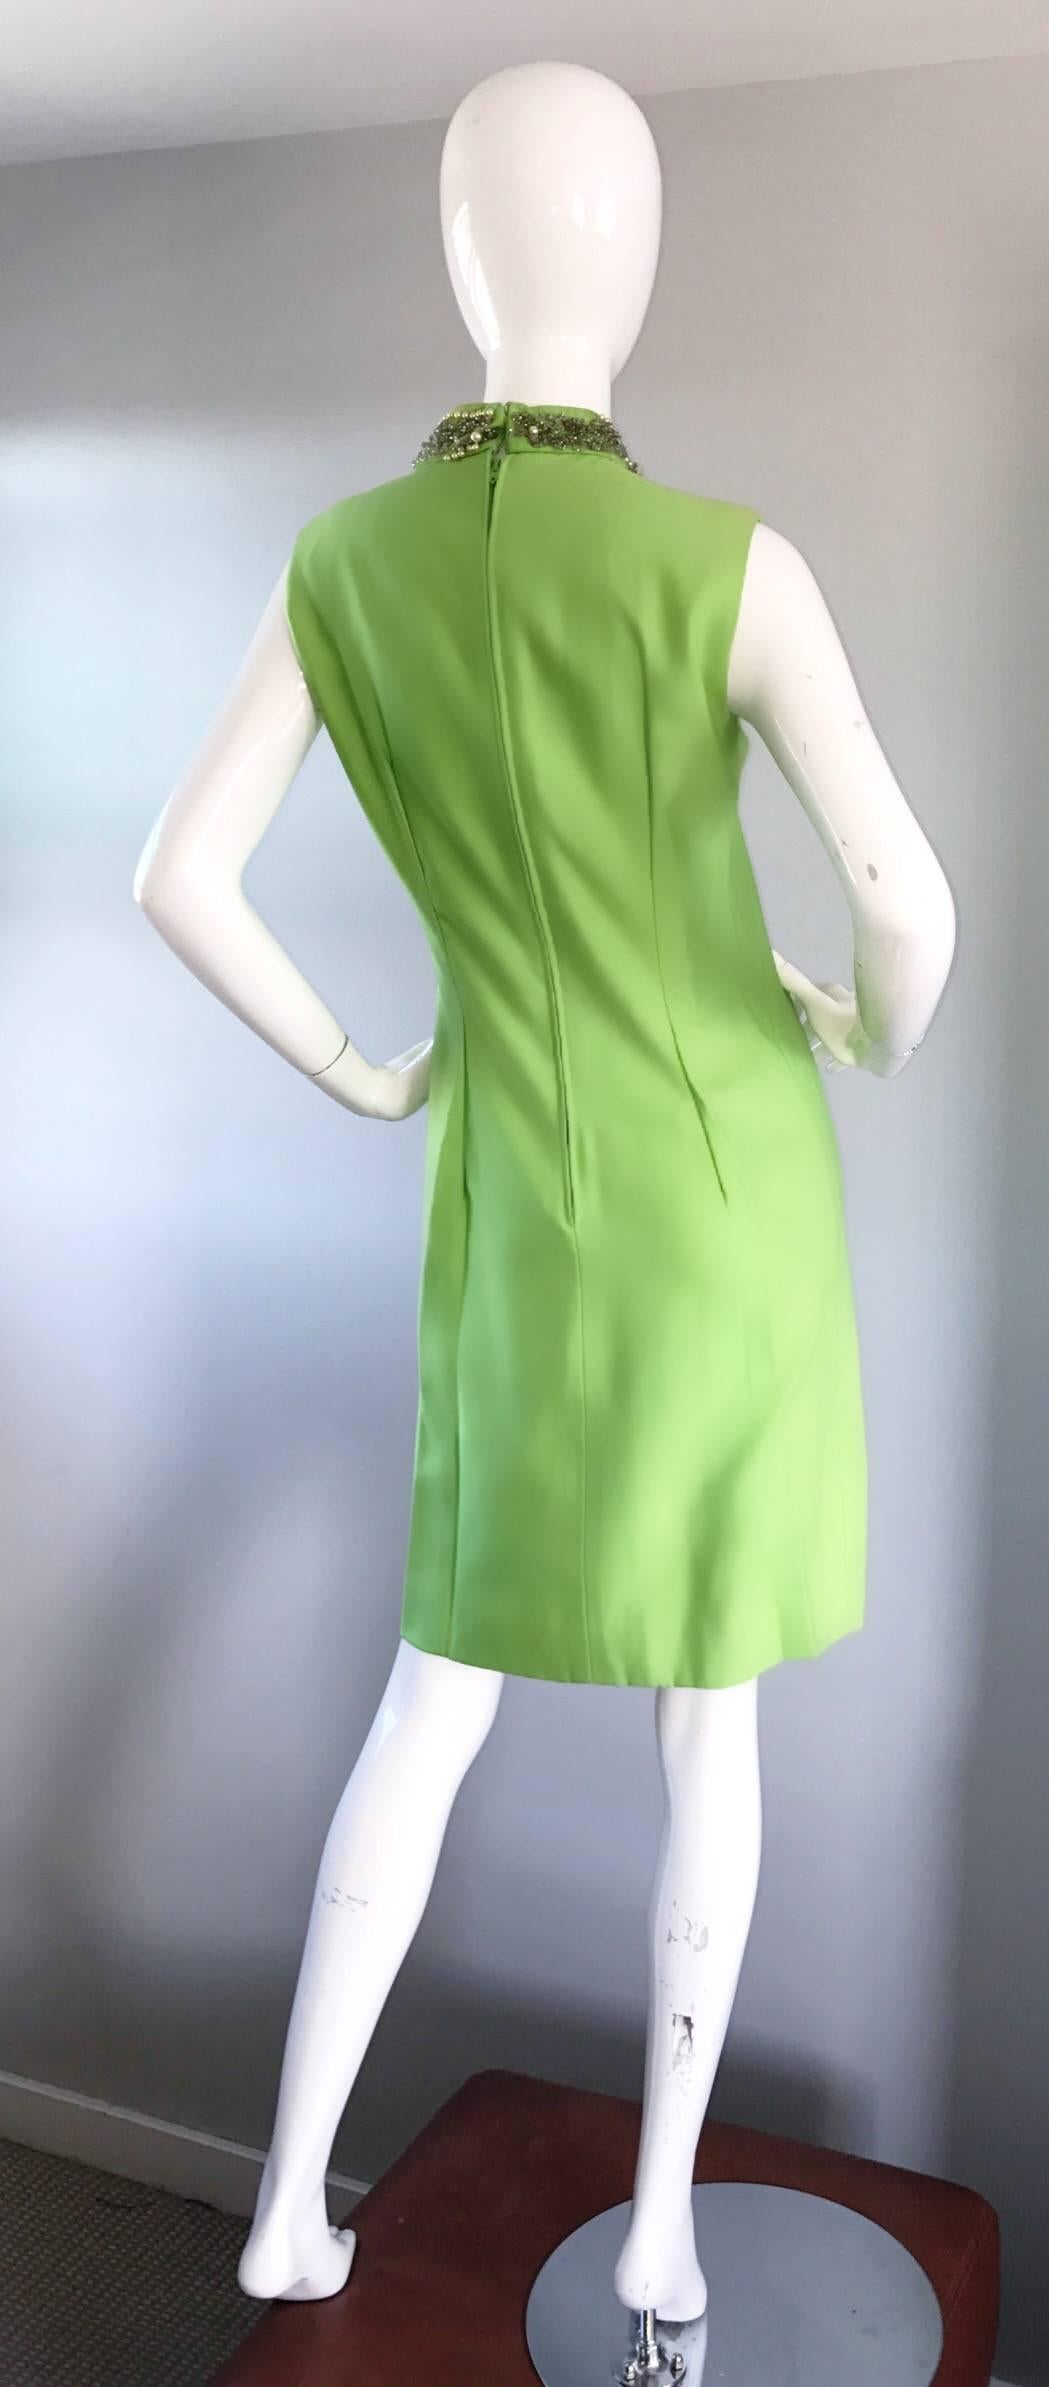 Chic vintage 1960s lime green shift dress! Flattering shilouette, with amazing details! Features hand-sewn iridescent sequins and beads at bust, with pearls lining the collar. Jackie O style that exudes class and fashion! Designer labels are